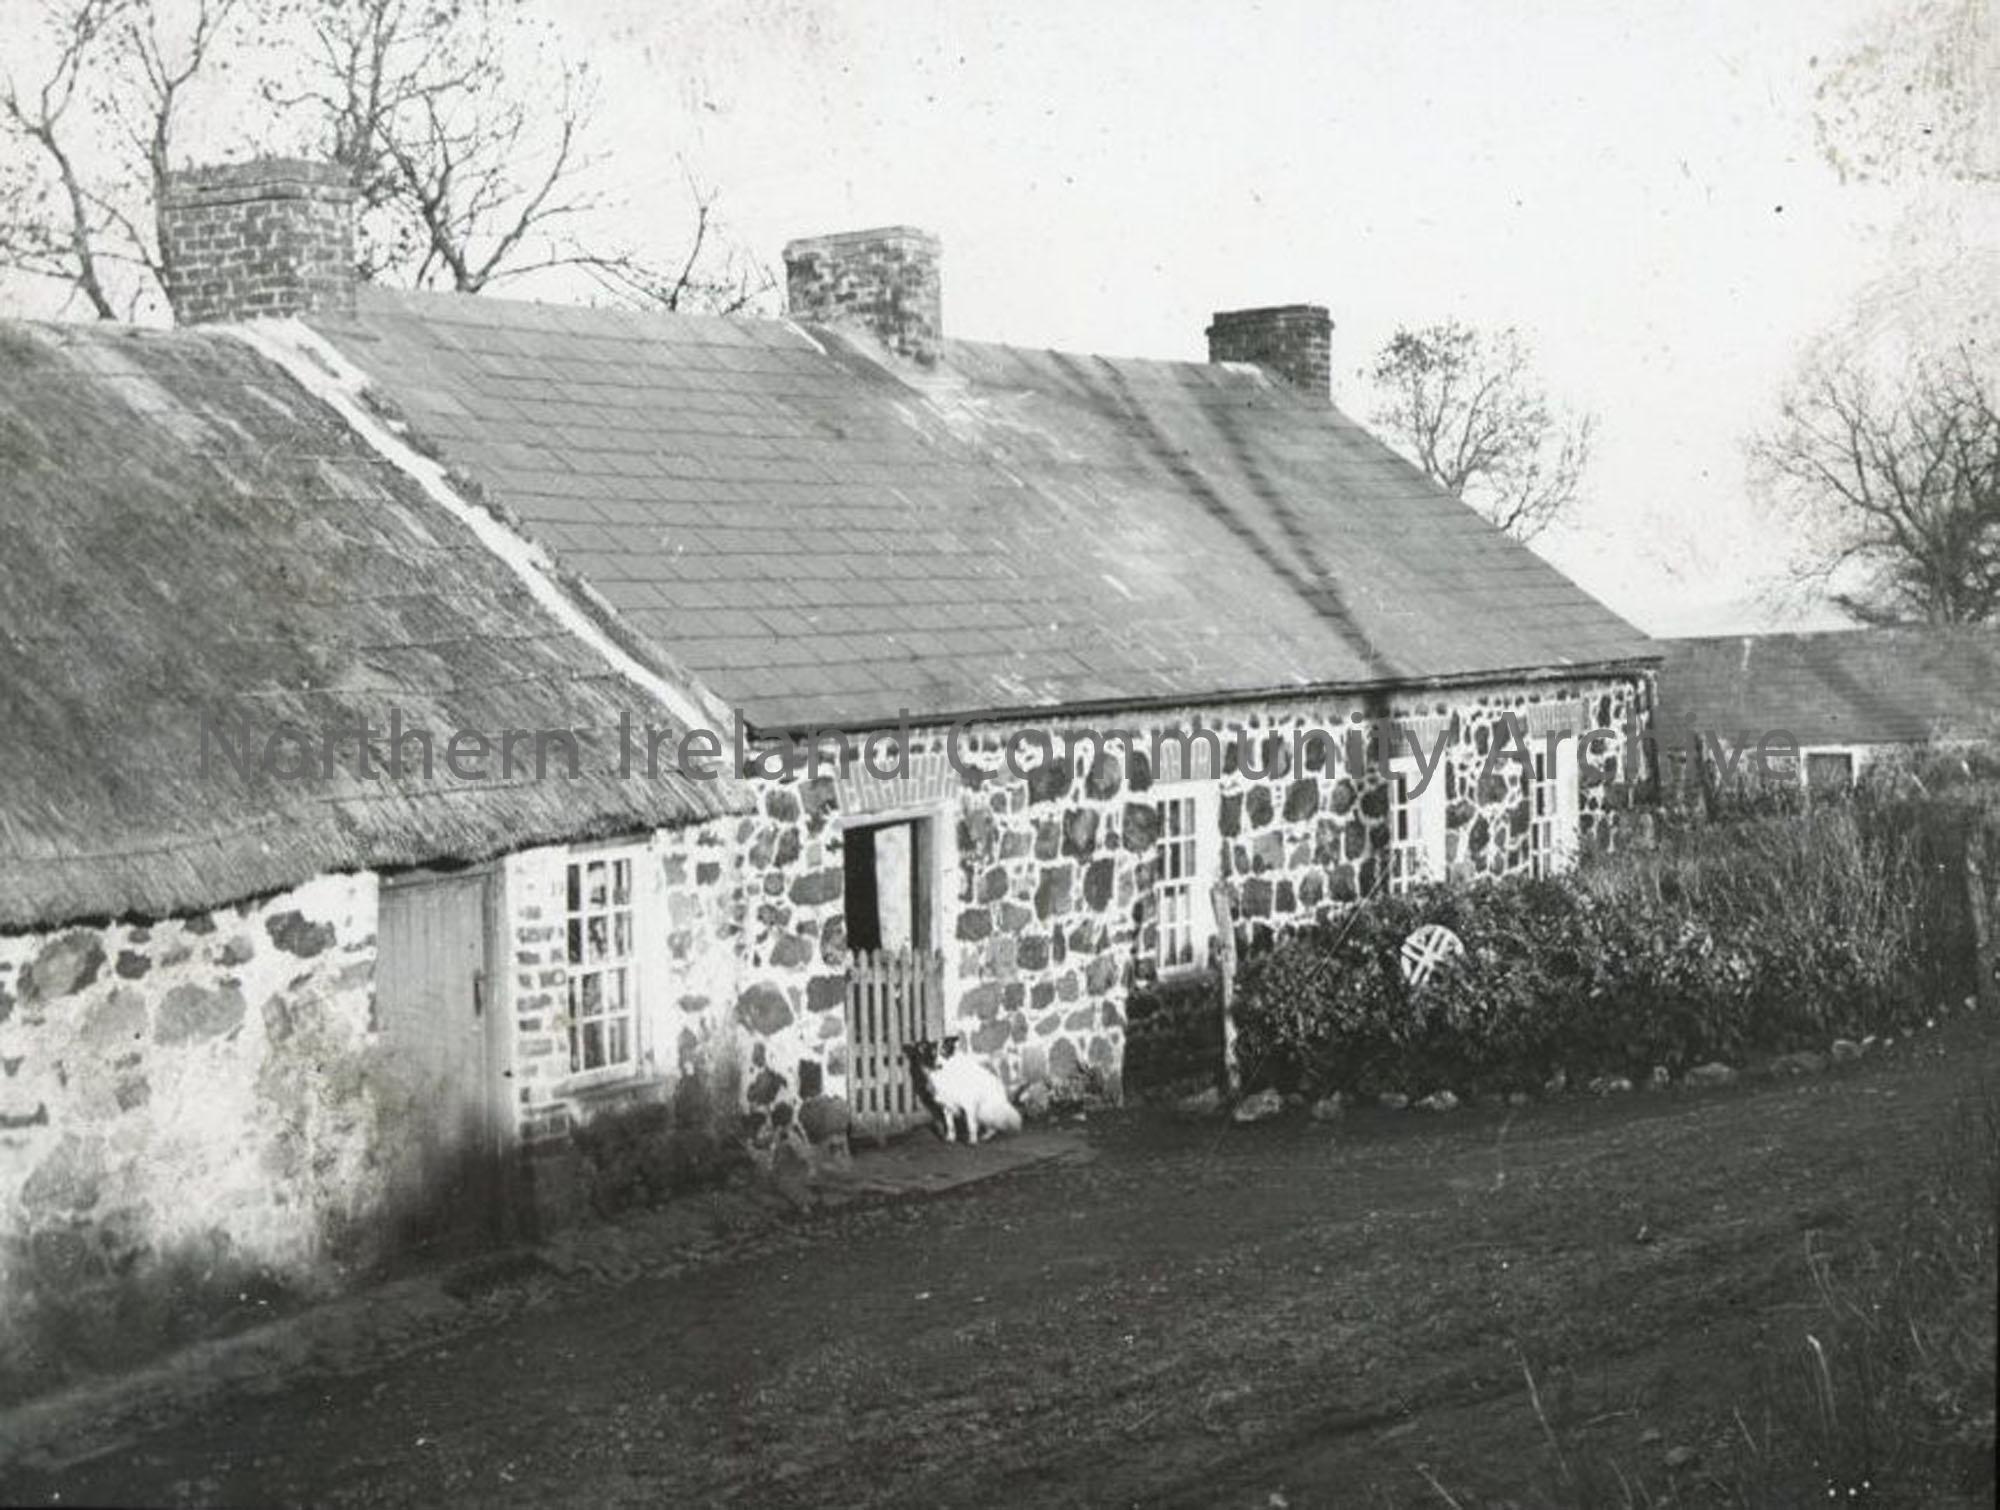 Haunted House, Magilligan (as titled by Sam Henry)